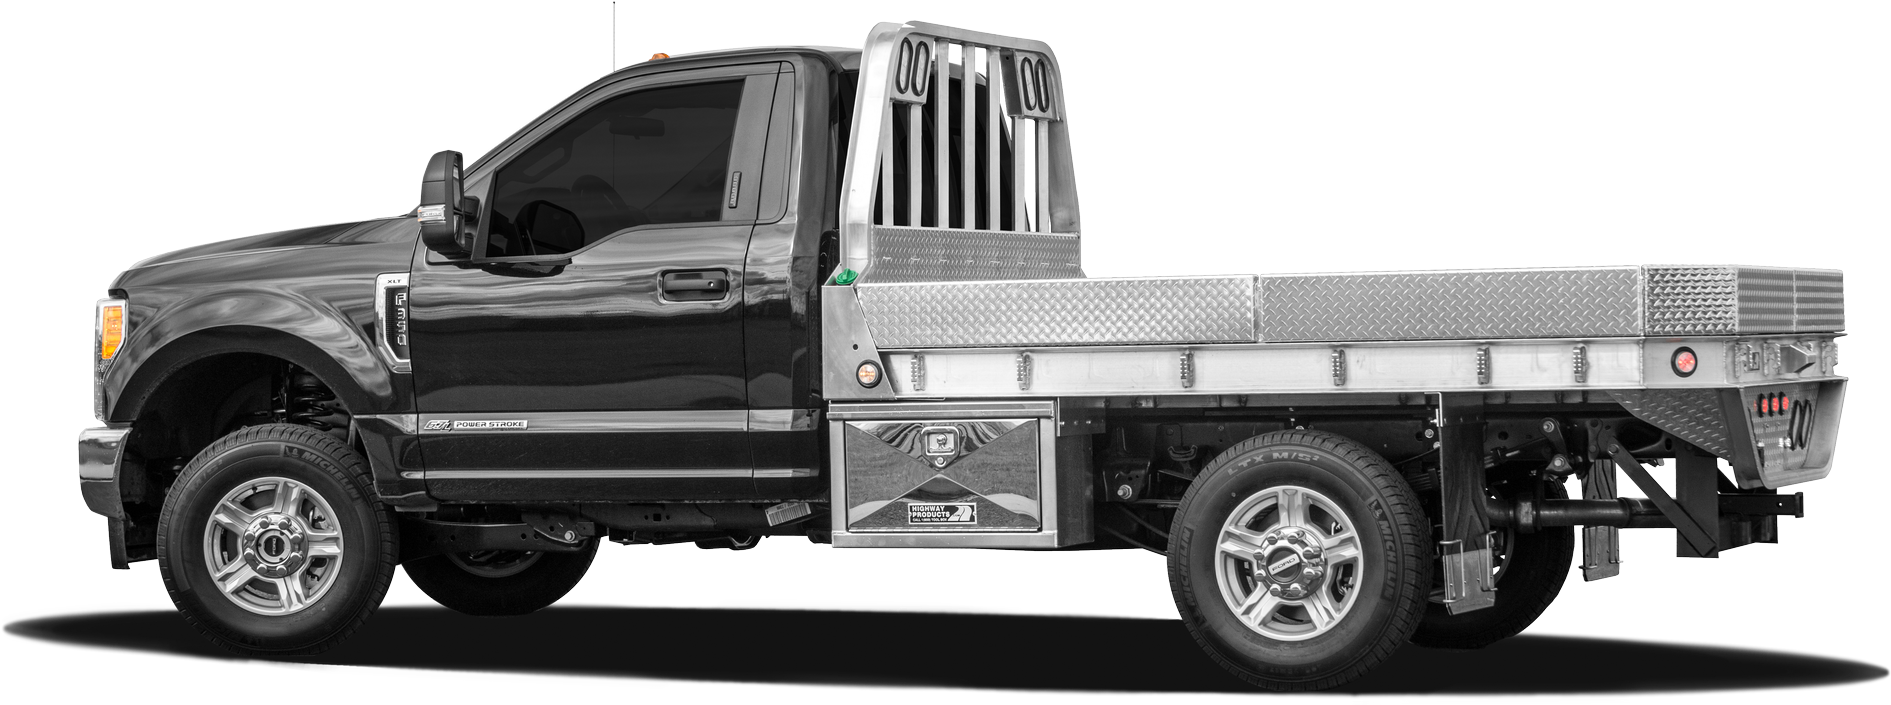 Strongback Flatbeds Cutouts 02 - Flatbed Truck (1920x716), Png Download